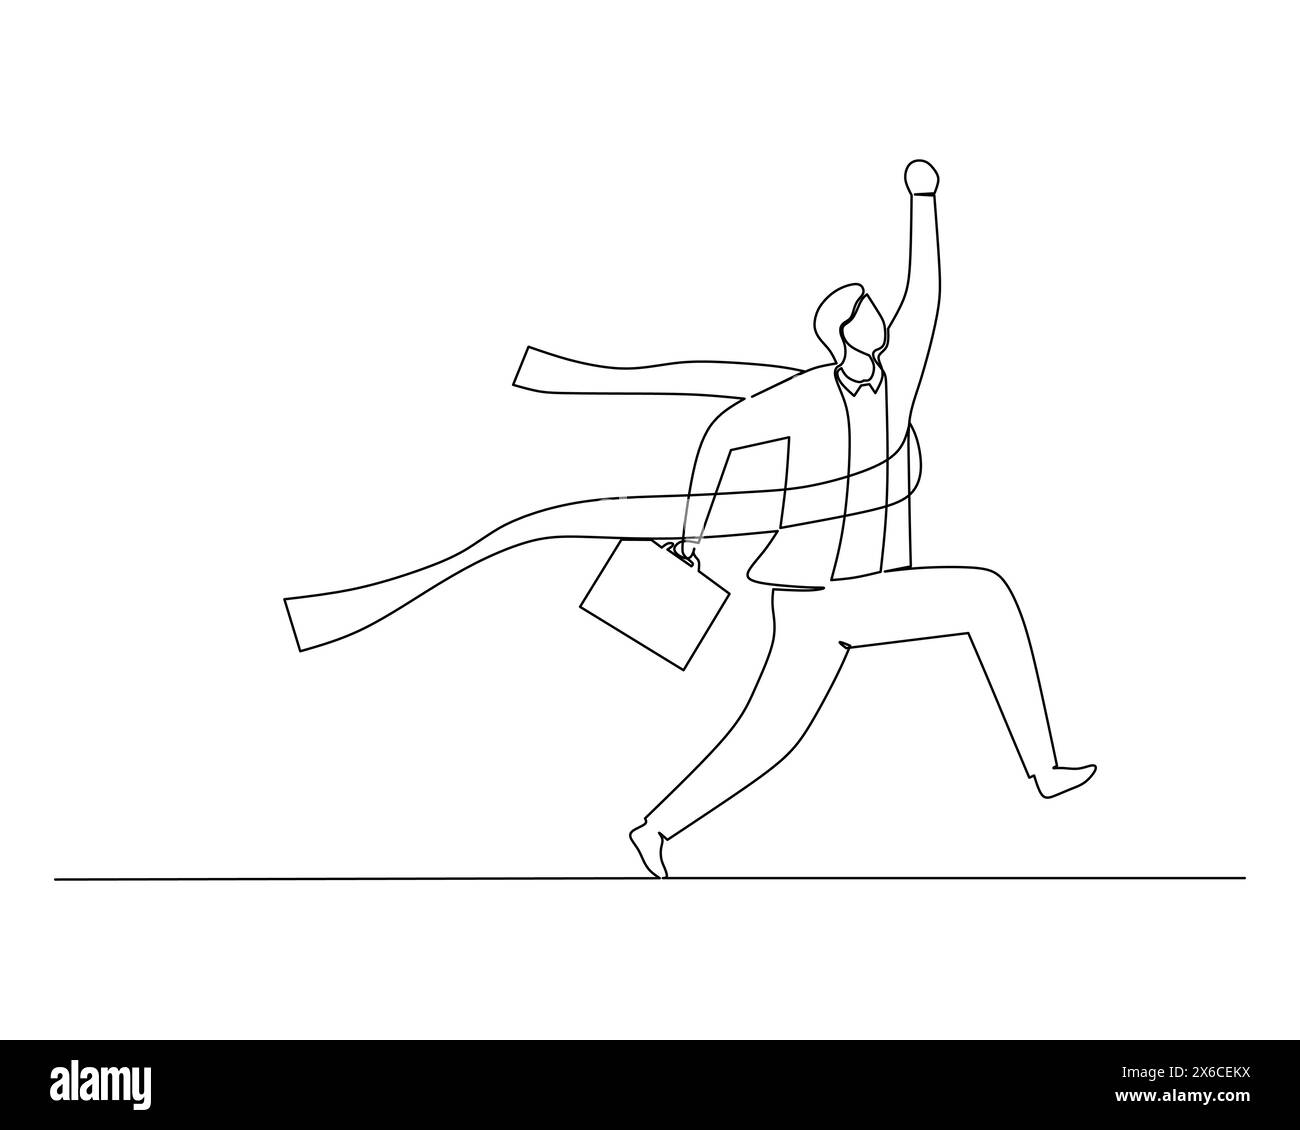 Continuous single line drawing of the man in the suit and carrying a suitcase reached the finish line in first place in the running race Stock Vector